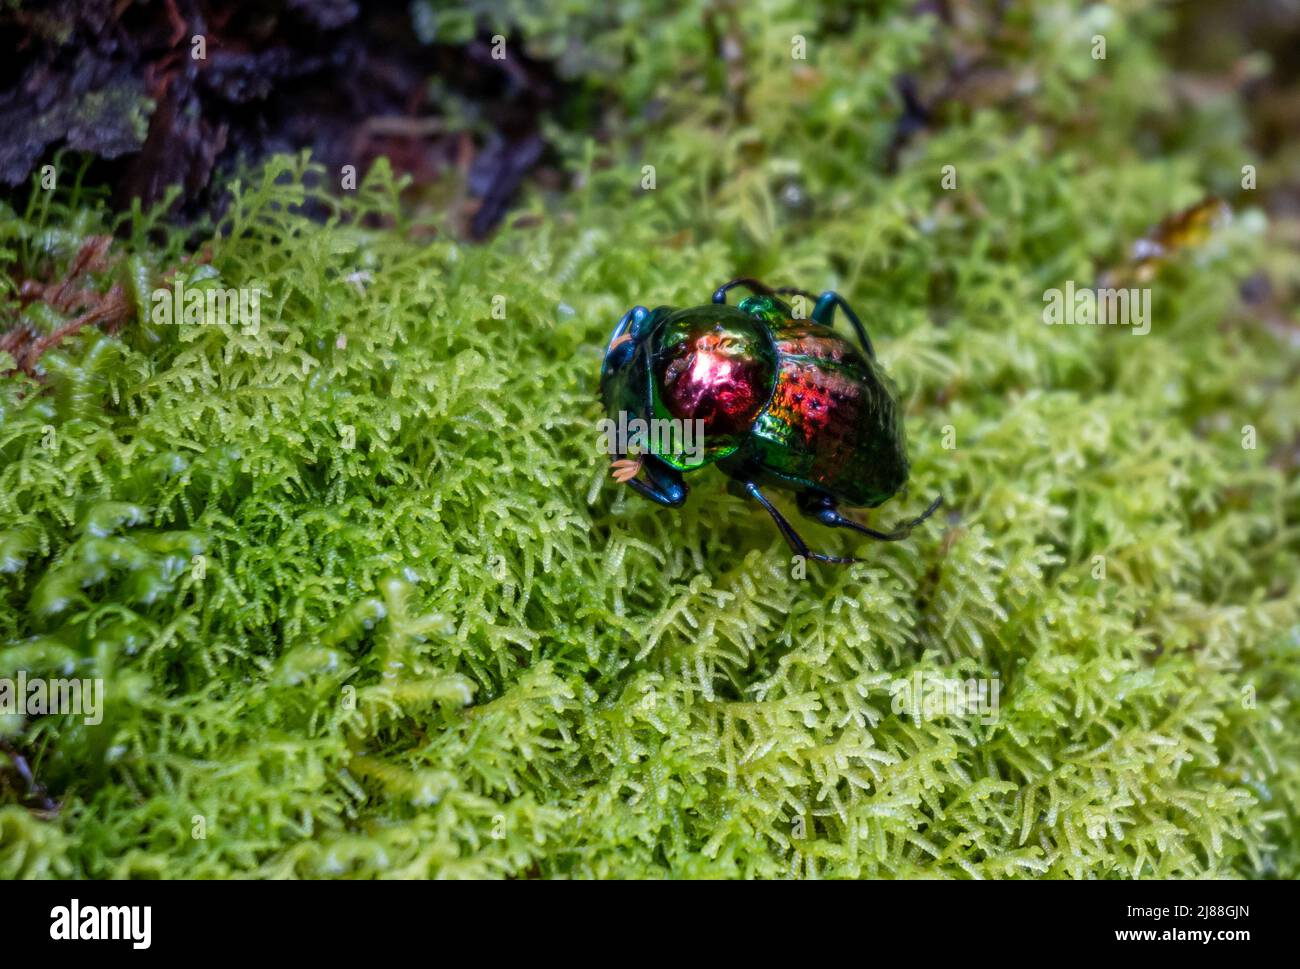 A beetle with colorful iridescent shell. Colombia, South America. Stock Photo